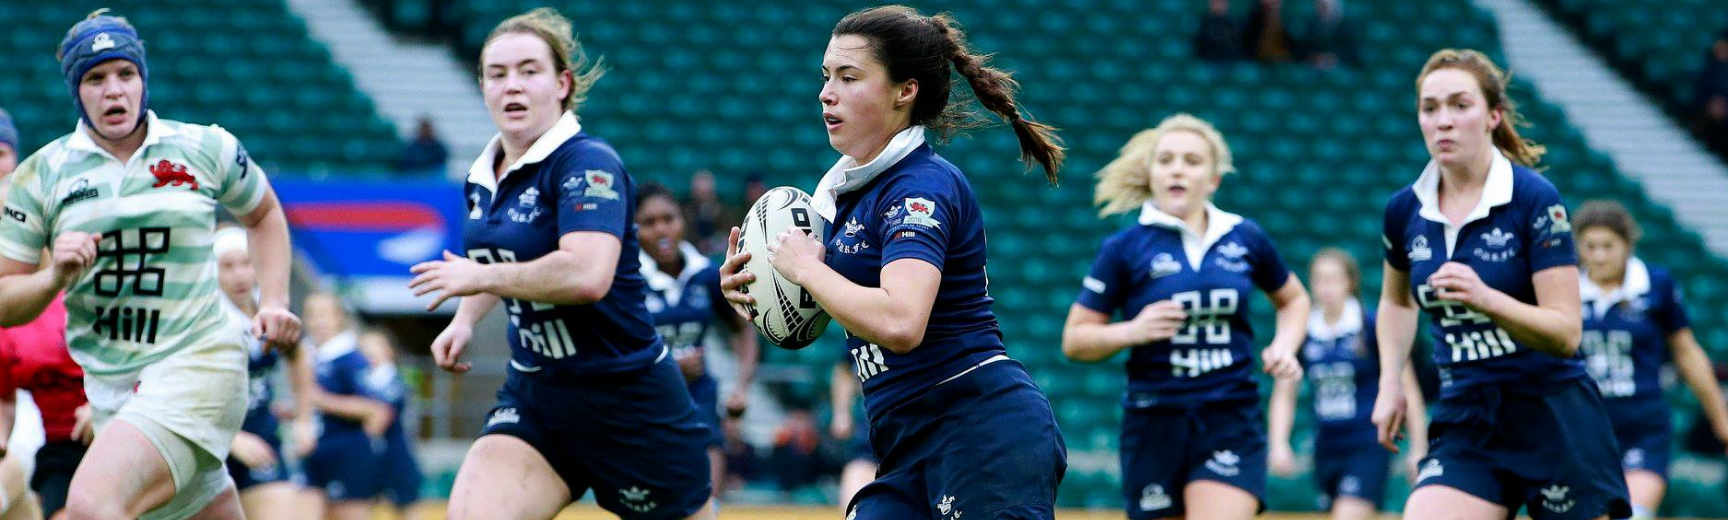 A women in dark blue carrying a rugby ball in the Varsity match against Cambridge, supported by several teammates, at Twickenham Stadium